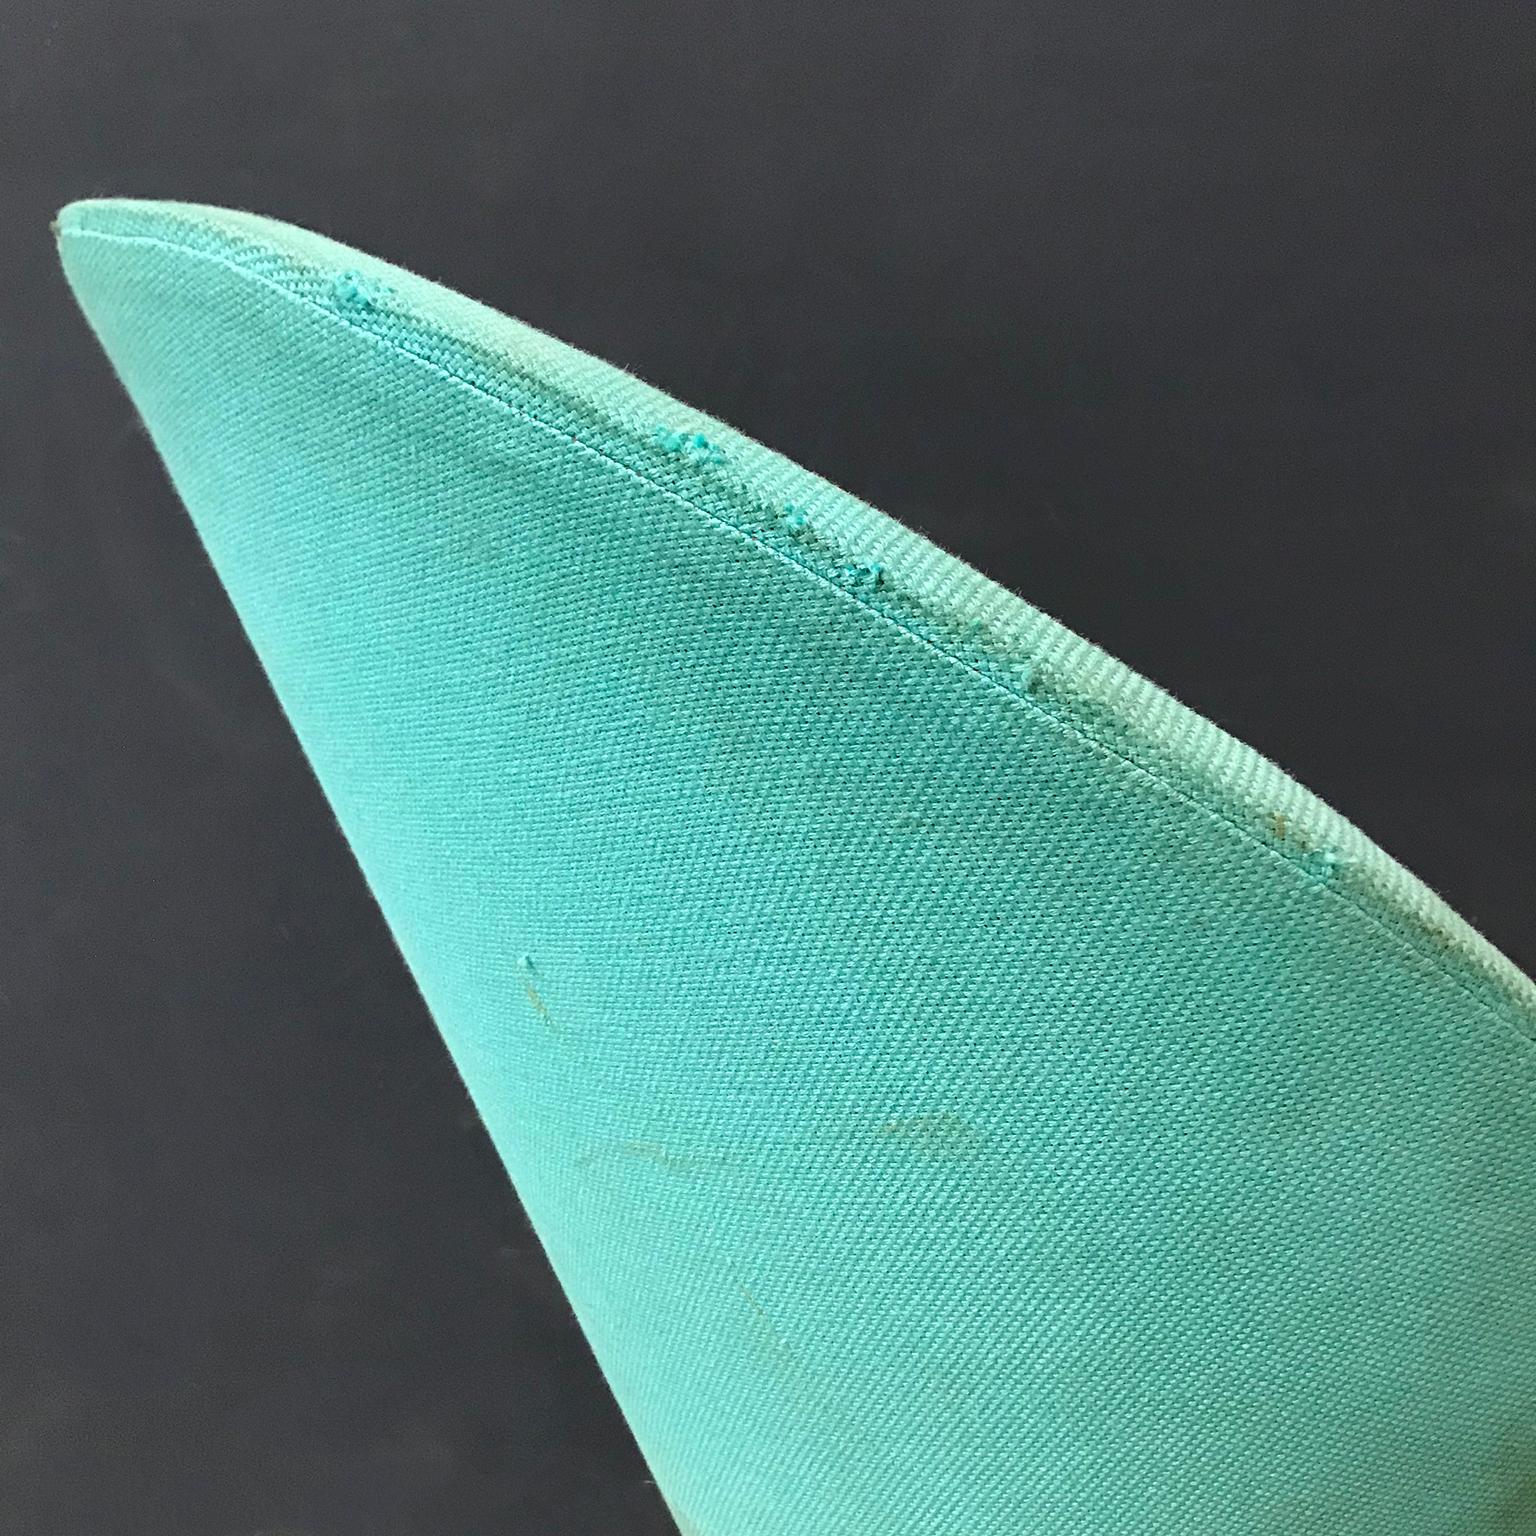 1958, Verner Panton for Rosenthal, Cone Chair in Original Turquoise Fabric 7